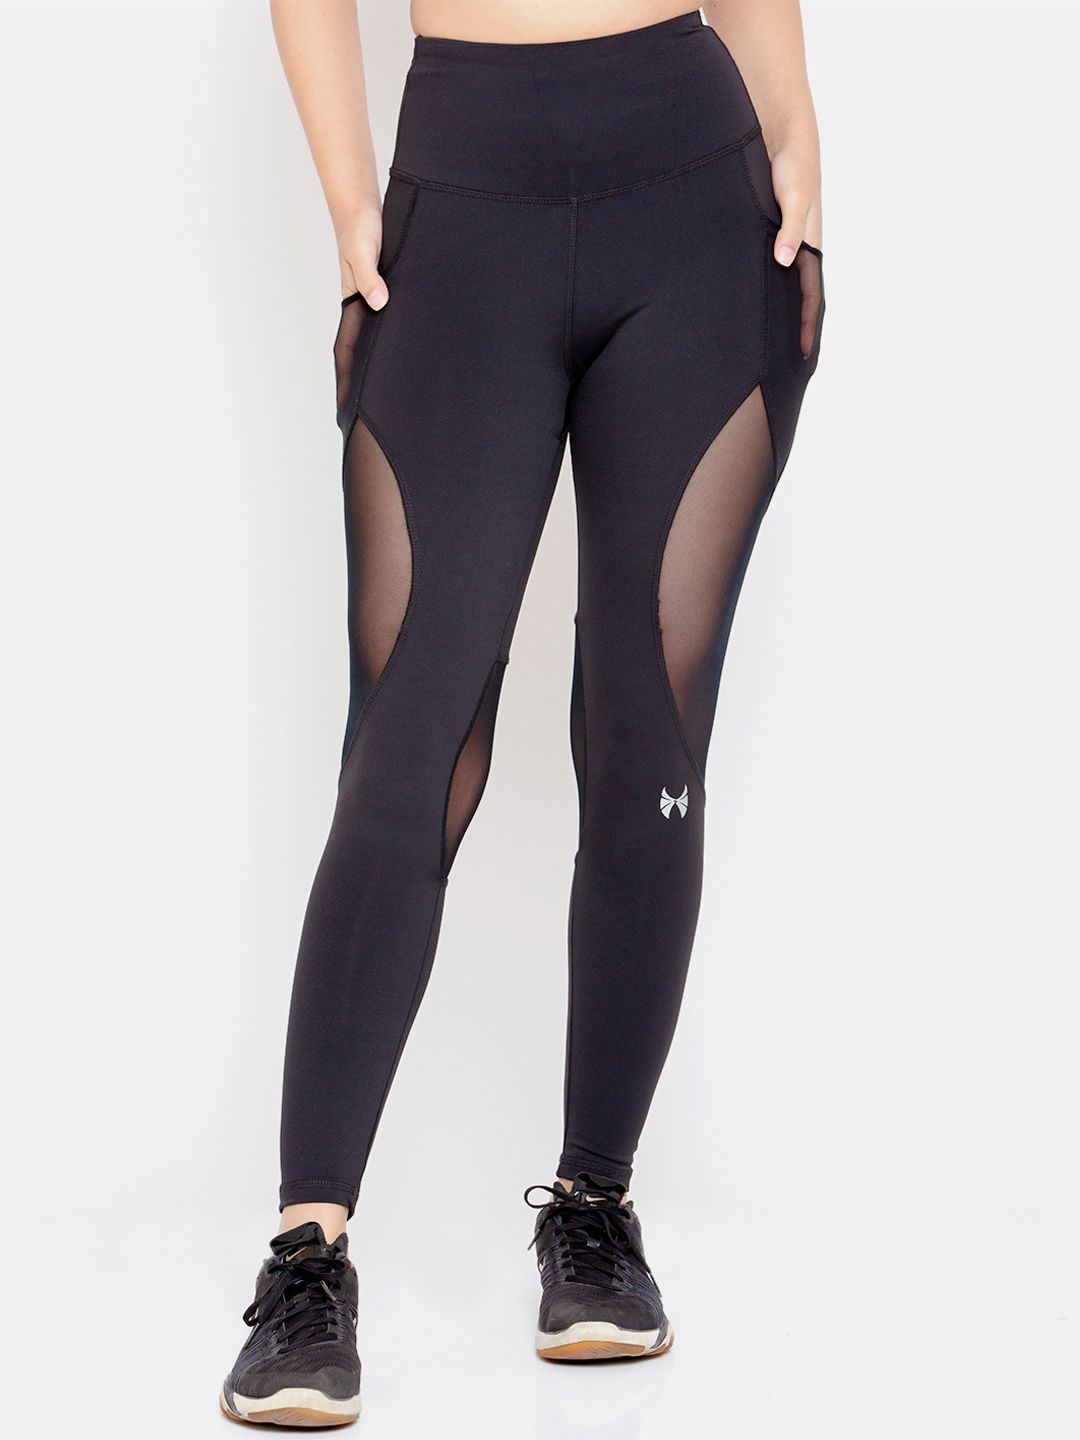 Skyria Women Black Solid Tech Dry Moisture Wicking Tights Price in India